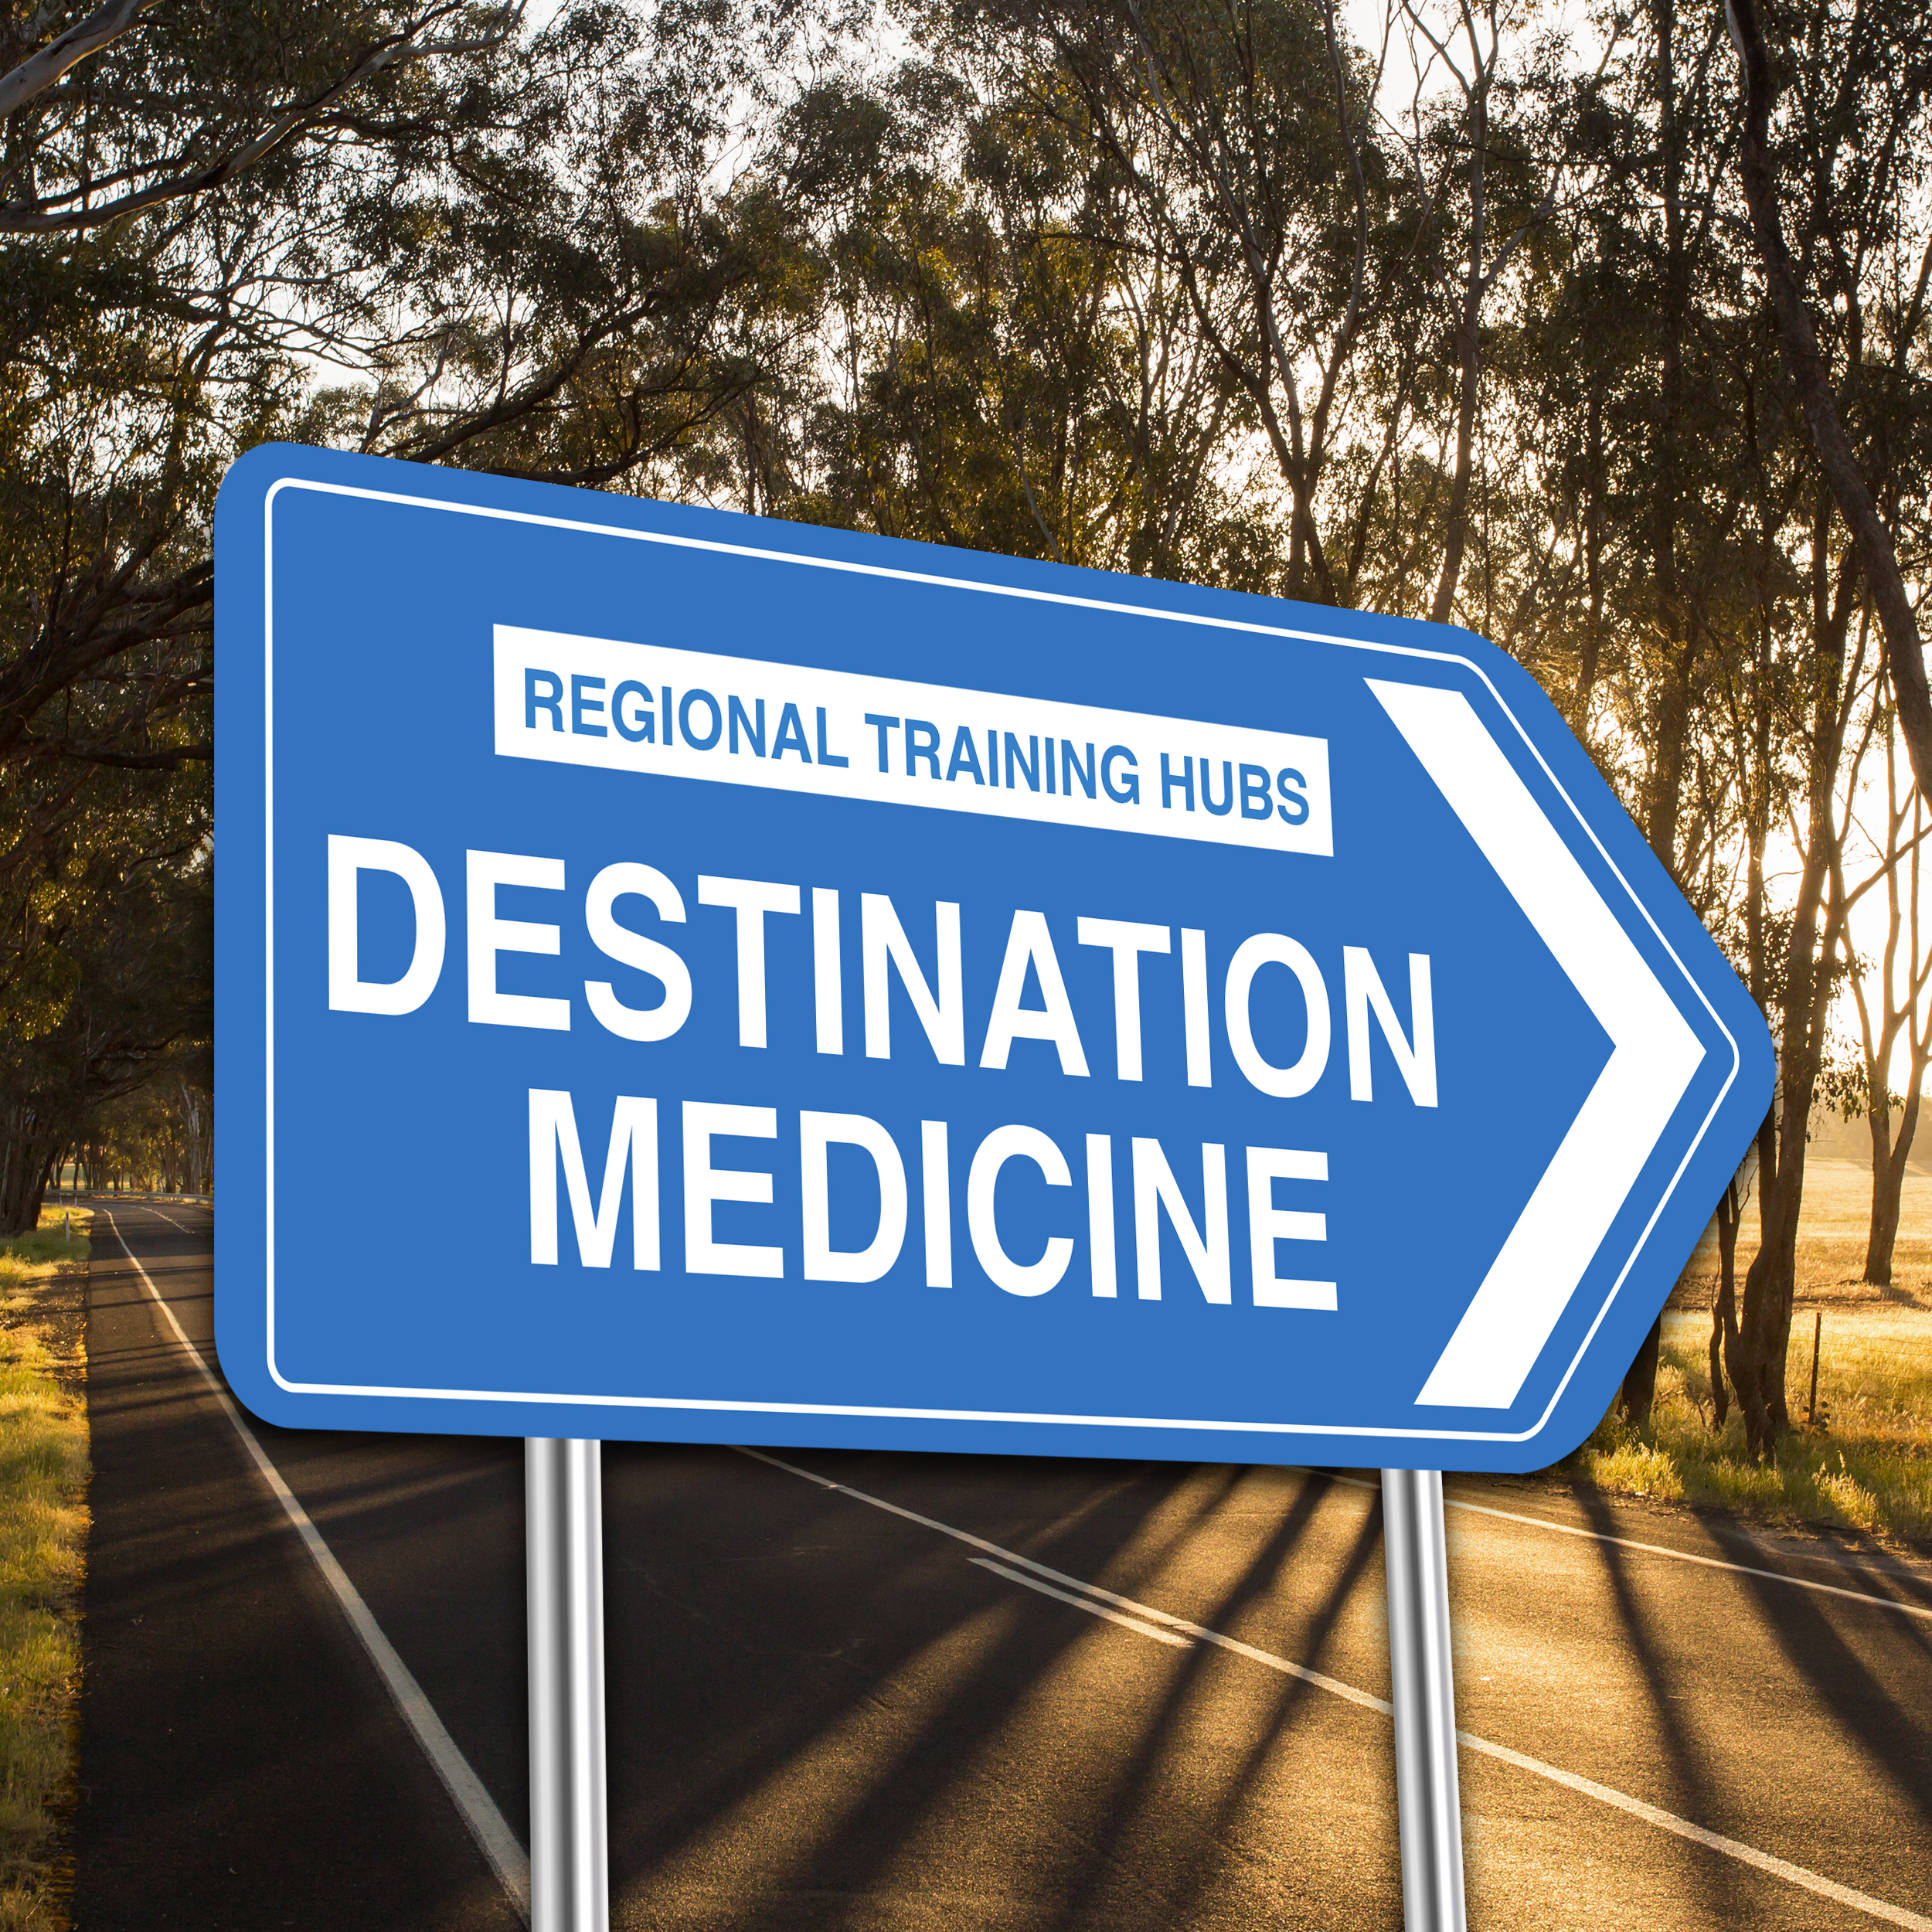 Doctors-in-Training: Dr Ian Carey – being part of the bigger picture in Broken Hill